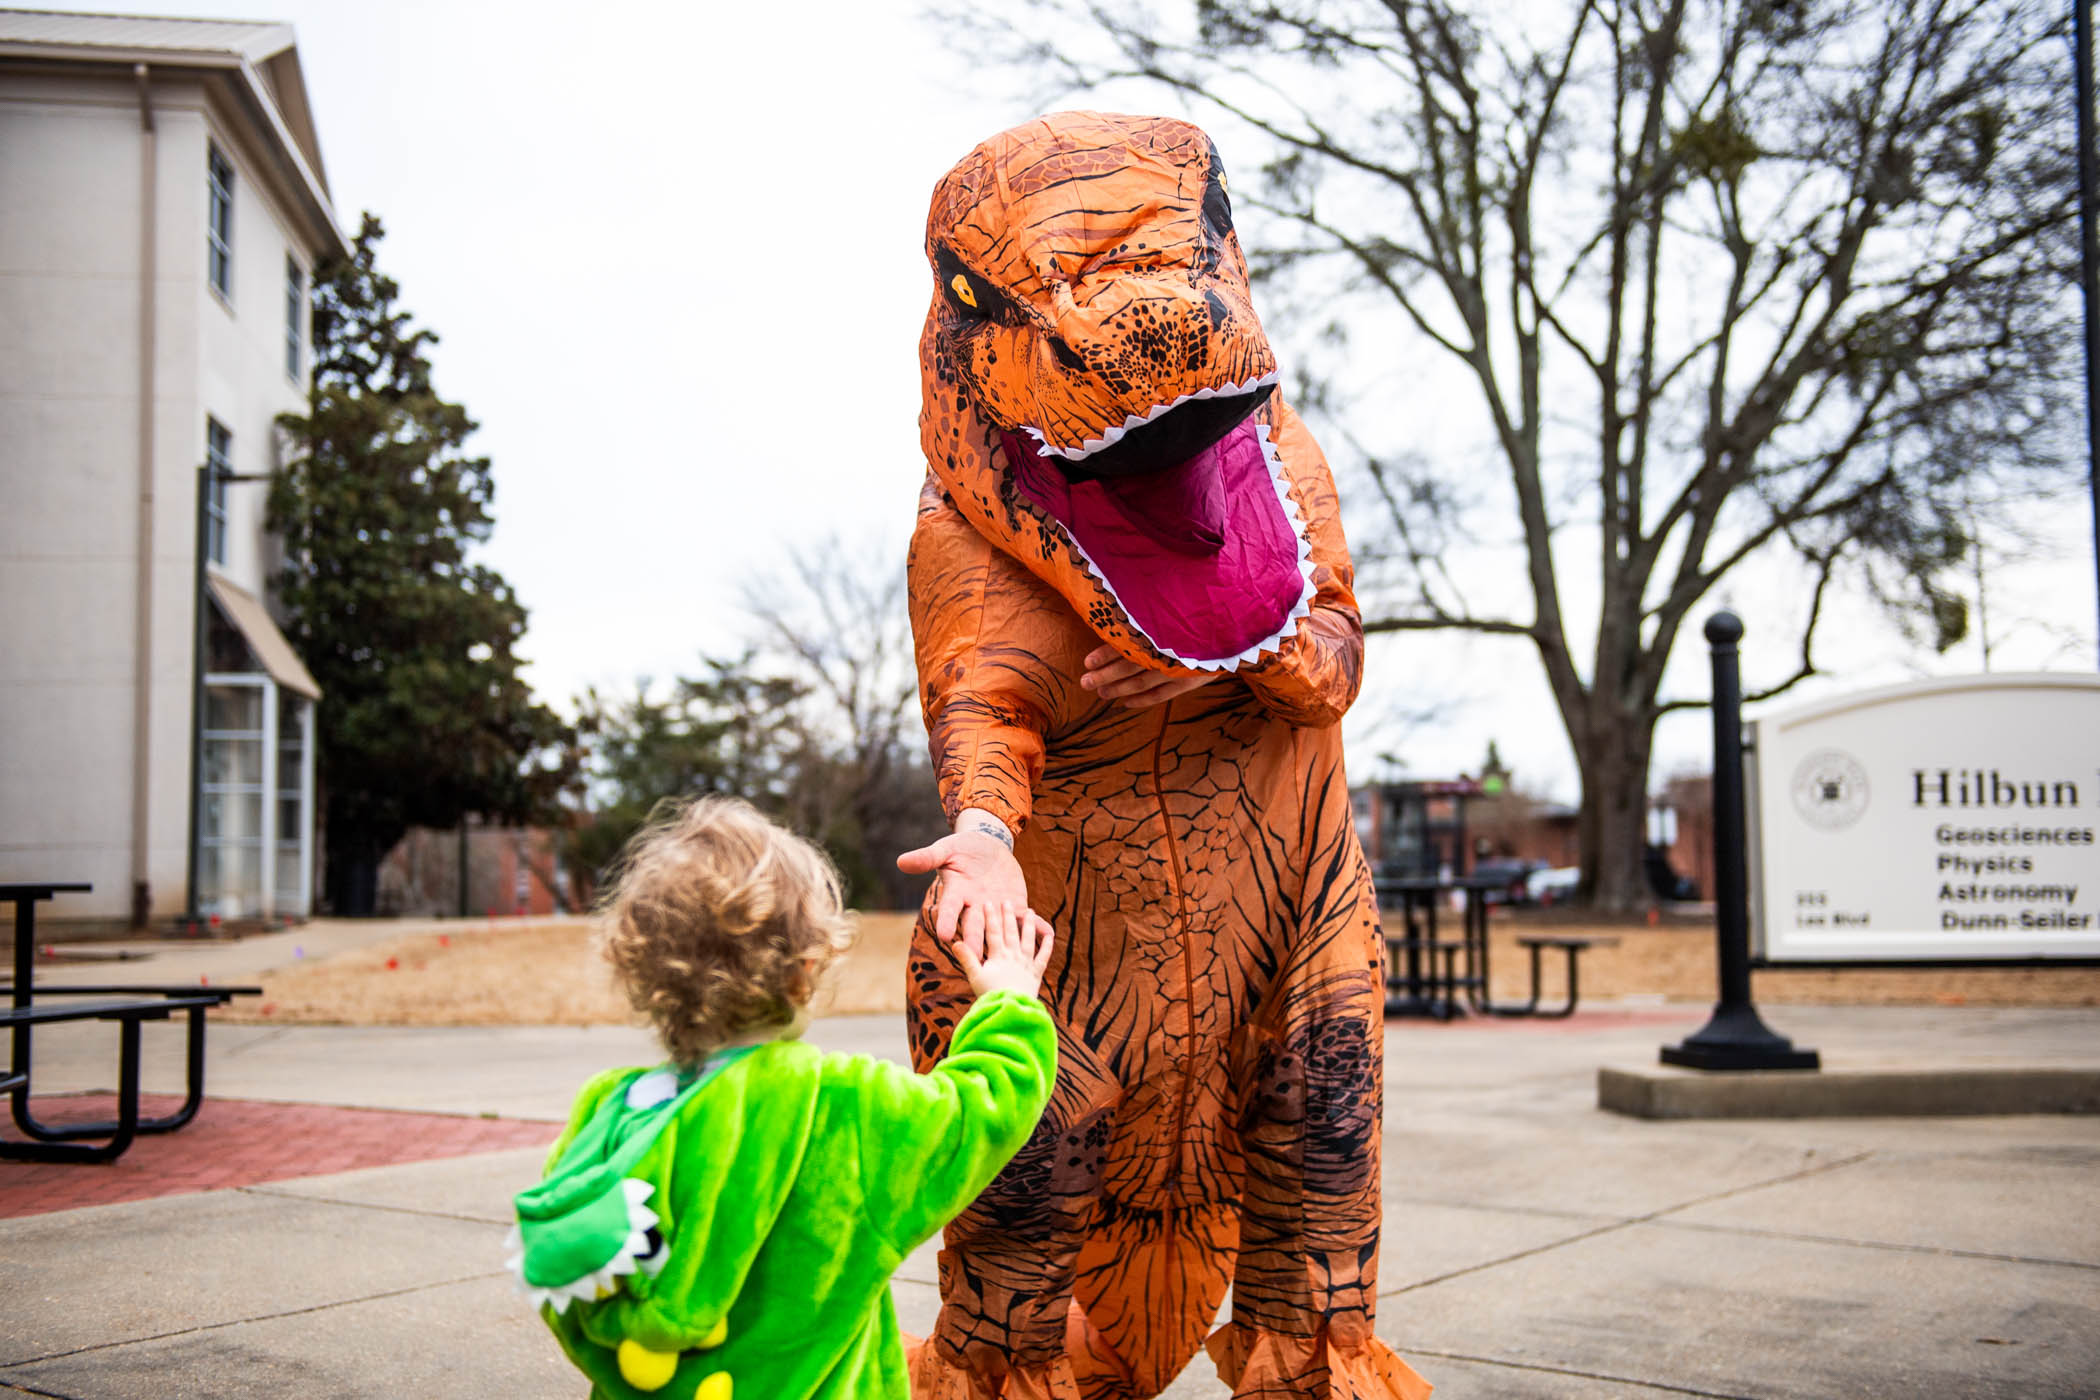 Jamie, a one-year-old explorer from Starkville, high-fives a &quot;T-Rex&quot; at 多多直播&#039;s annual &quot;Science Night at the Museums.&quot; Held at Hilbun Hall and Cobb Institute of Archaeology, this engaging event welcomed participants to fascinating exhibits and hands-on activities centered around the wonders of science.